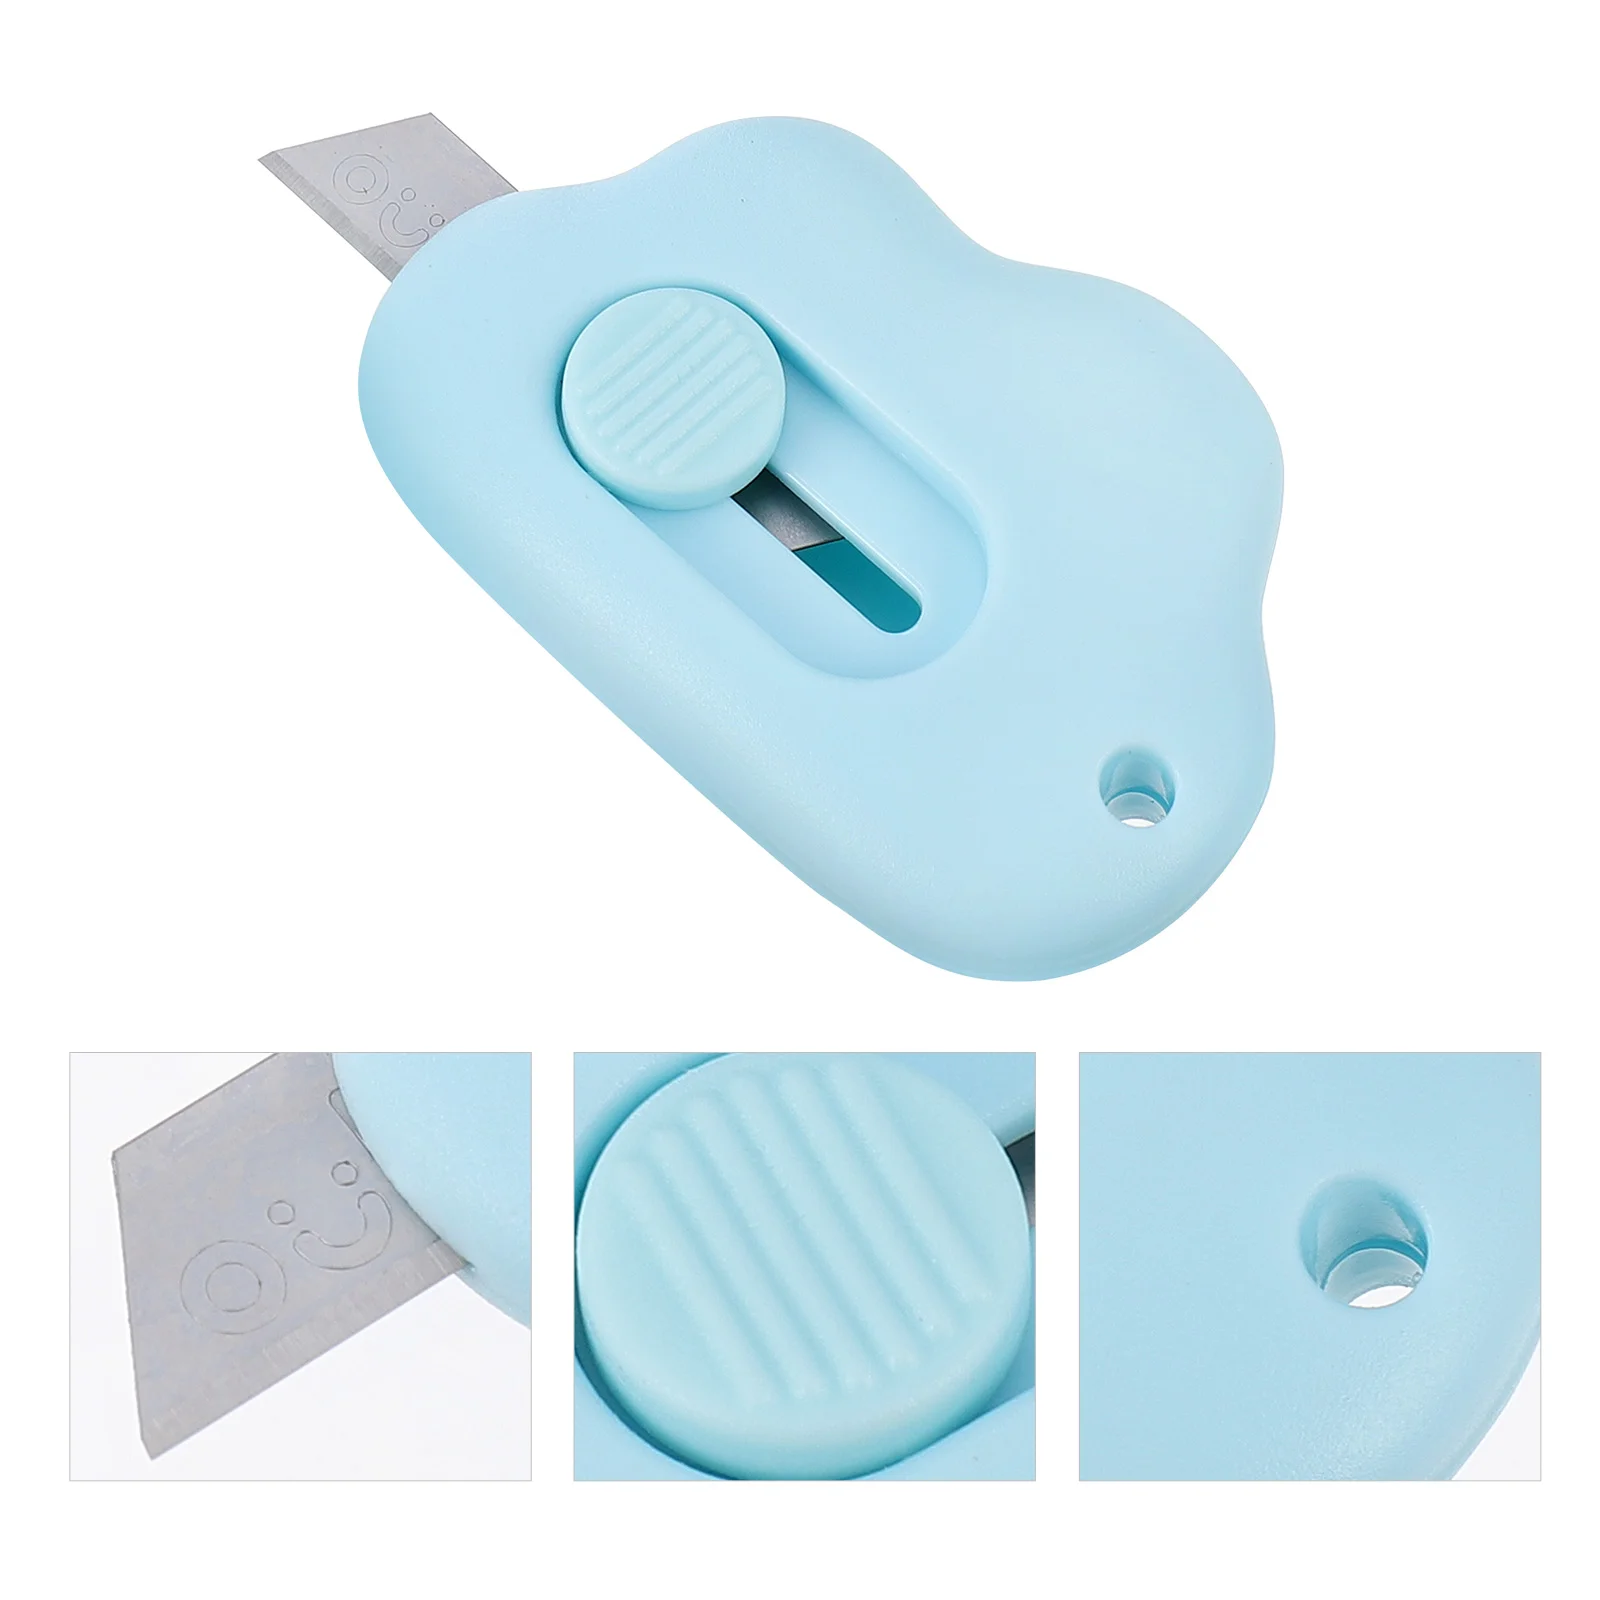 

Box Mini Utility Opener Retractable Keychain Folding Cute Package Slice Ceramic Chain Key Letter Safety Telescopic Tool Openers